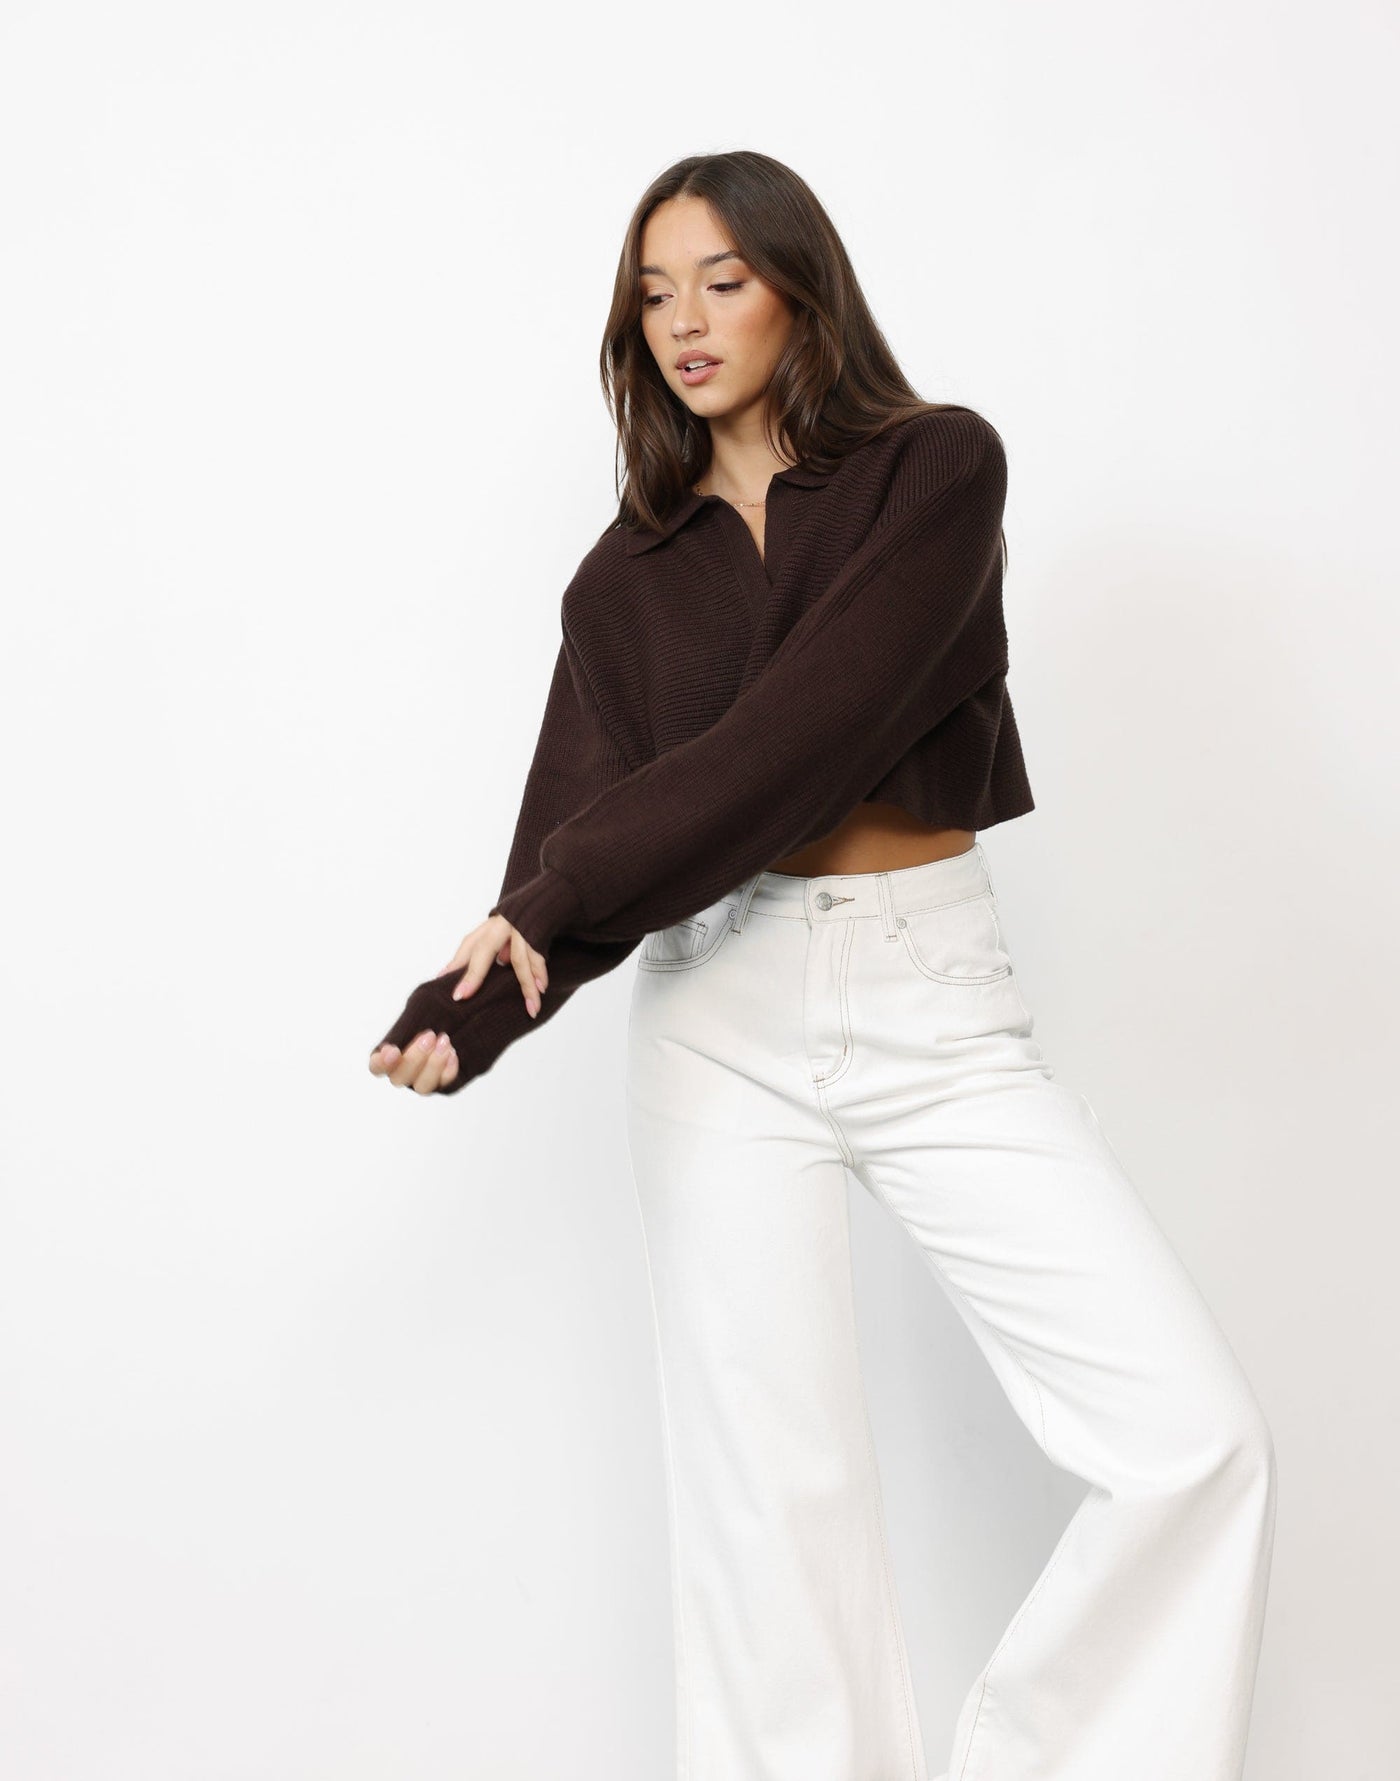 Logan Jumper (Chocolate) - Cropped Collared Knit Jumper - Women's Top - Charcoal Clothing